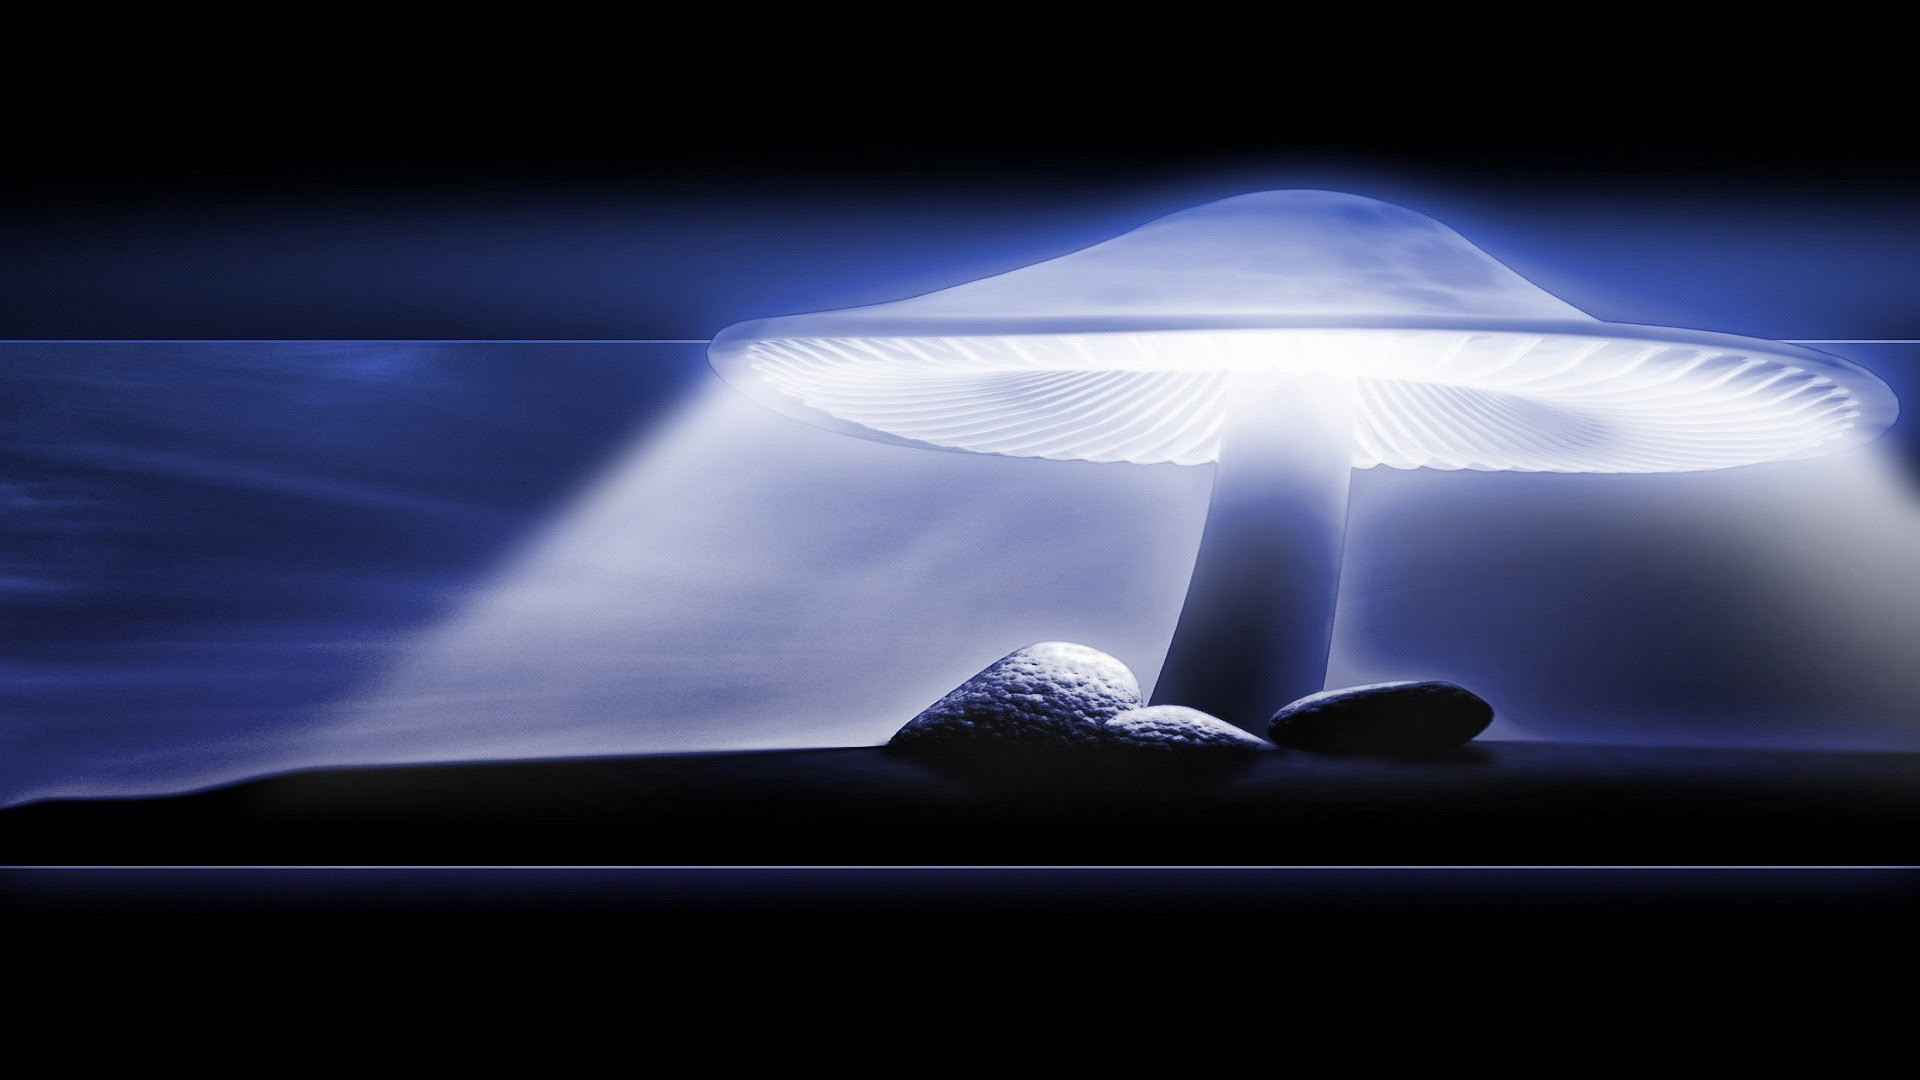 1920x1080 Neon Mushroom Wallpaper Images & Pictures - Becuo